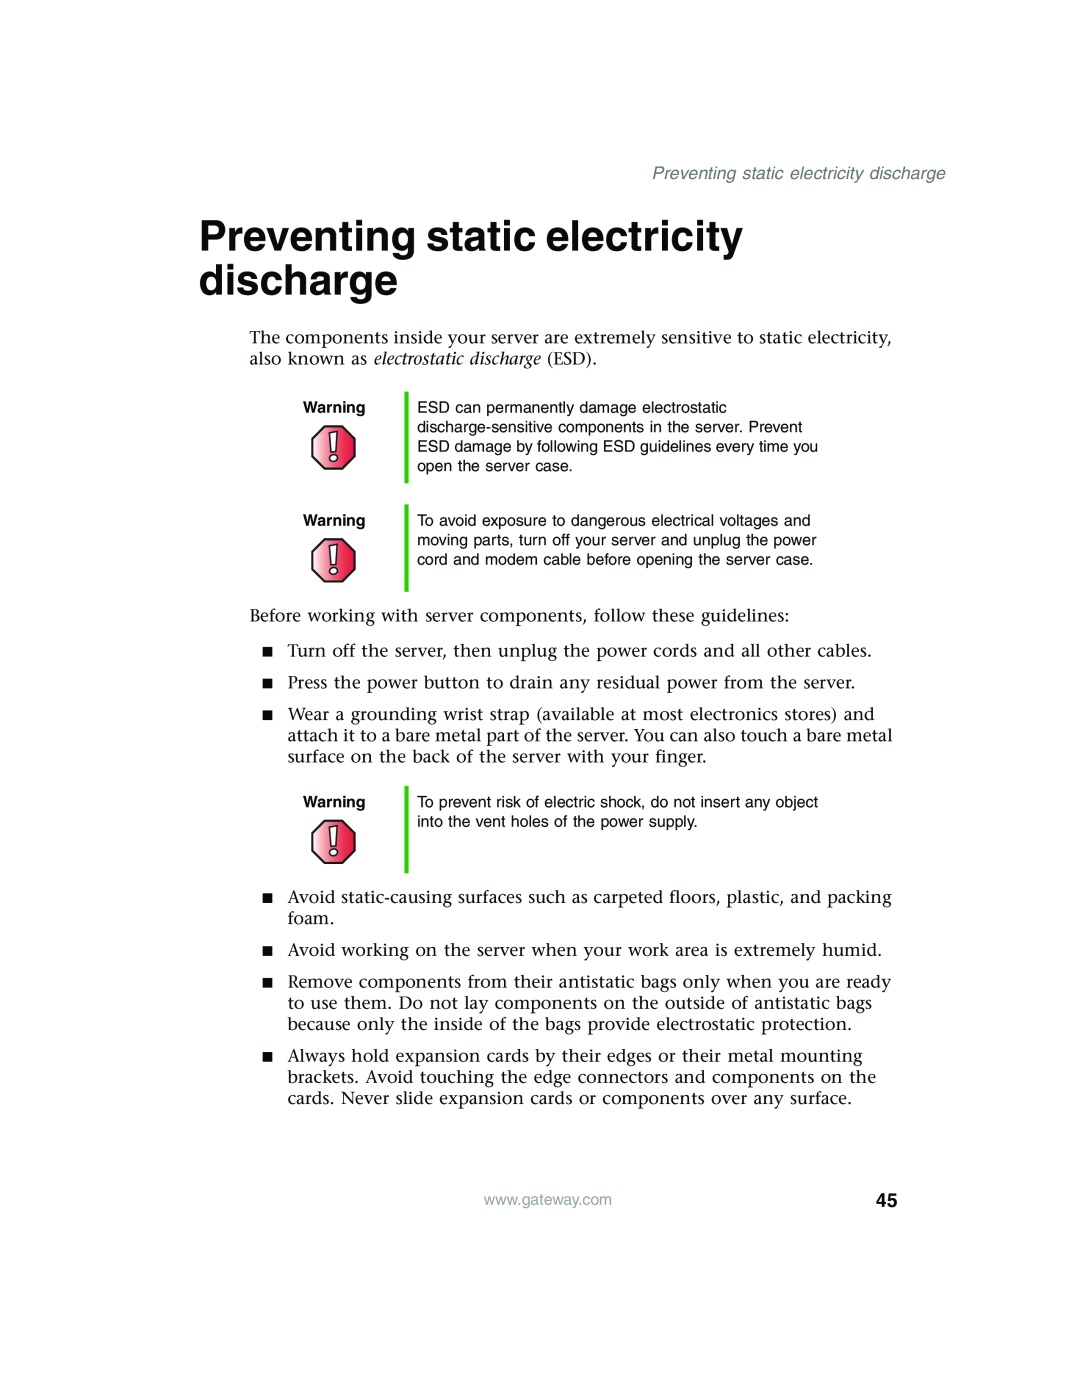 Gateway 955 manual Preventing static electricity discharge 